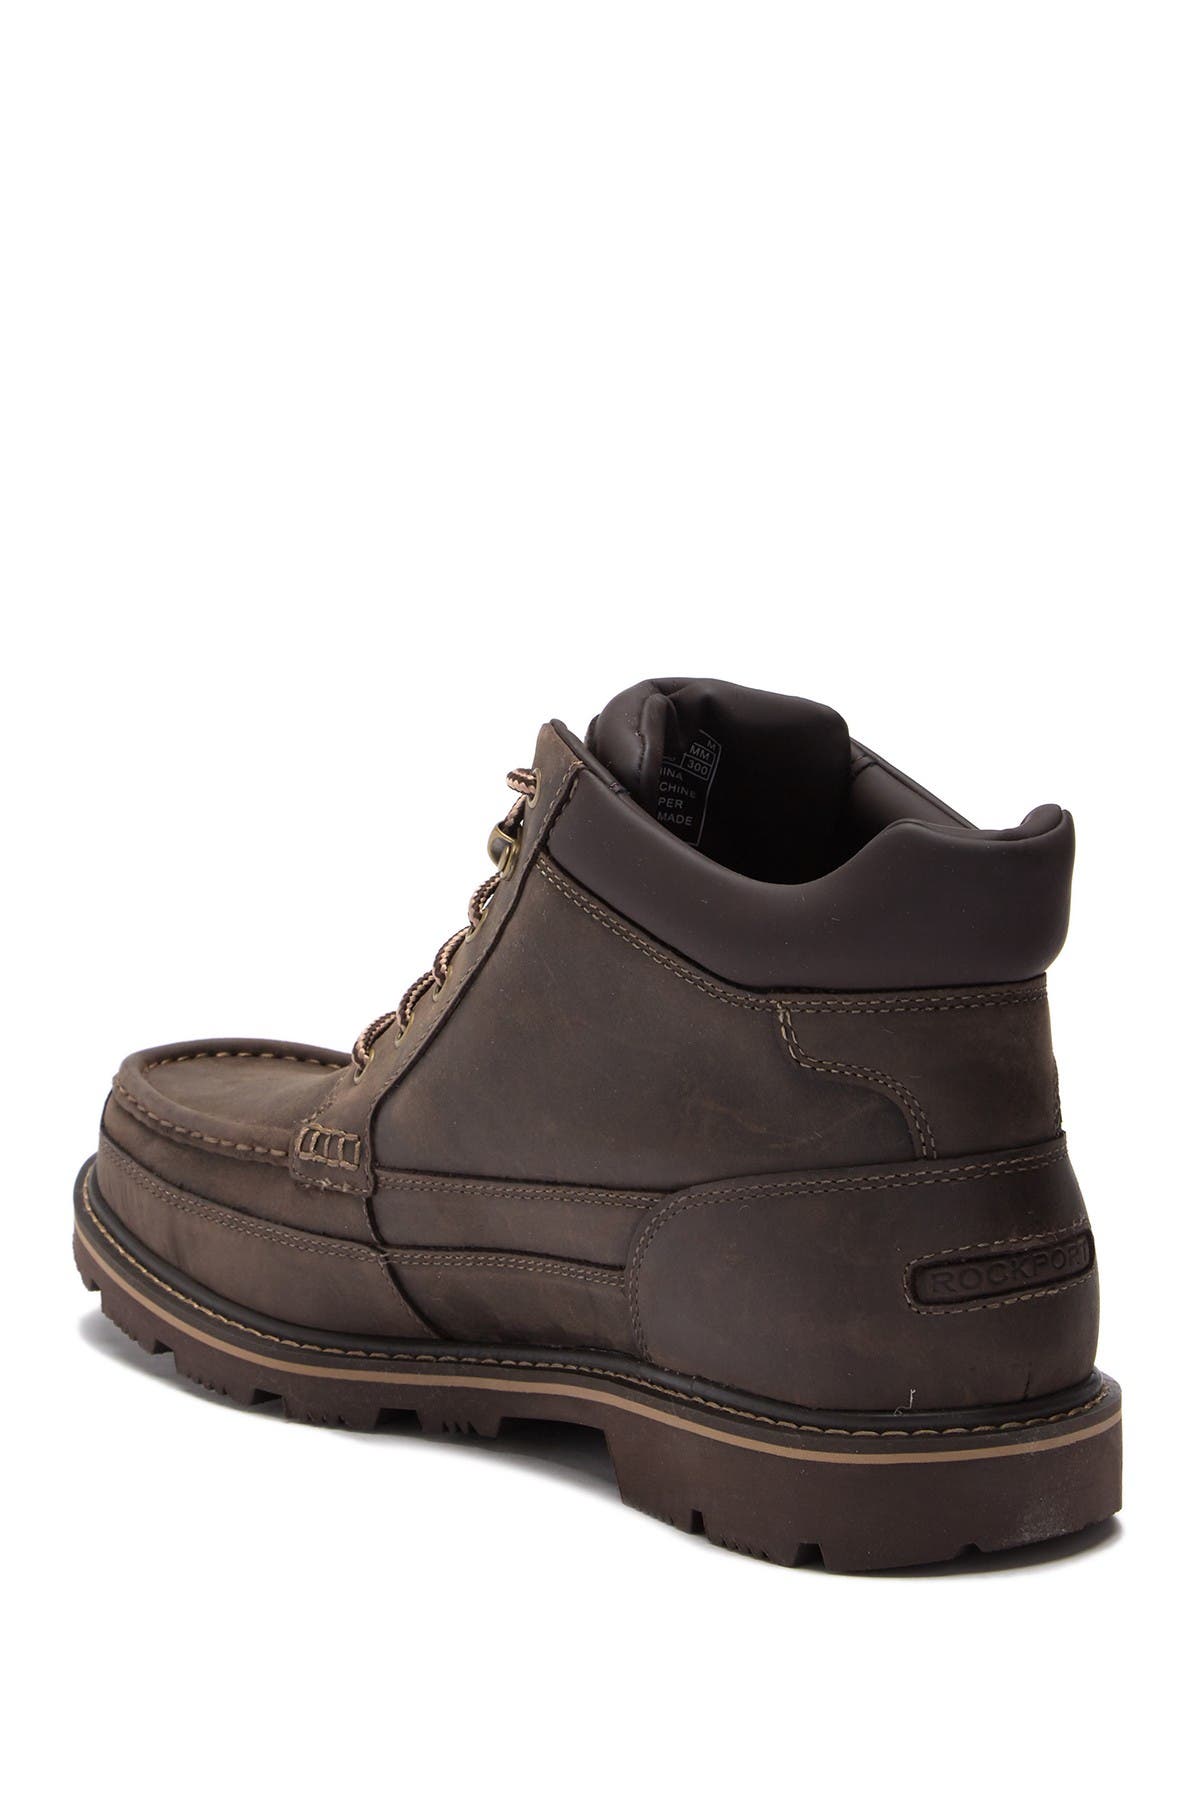 GB Moc Mid Waterproof Leather Boot 